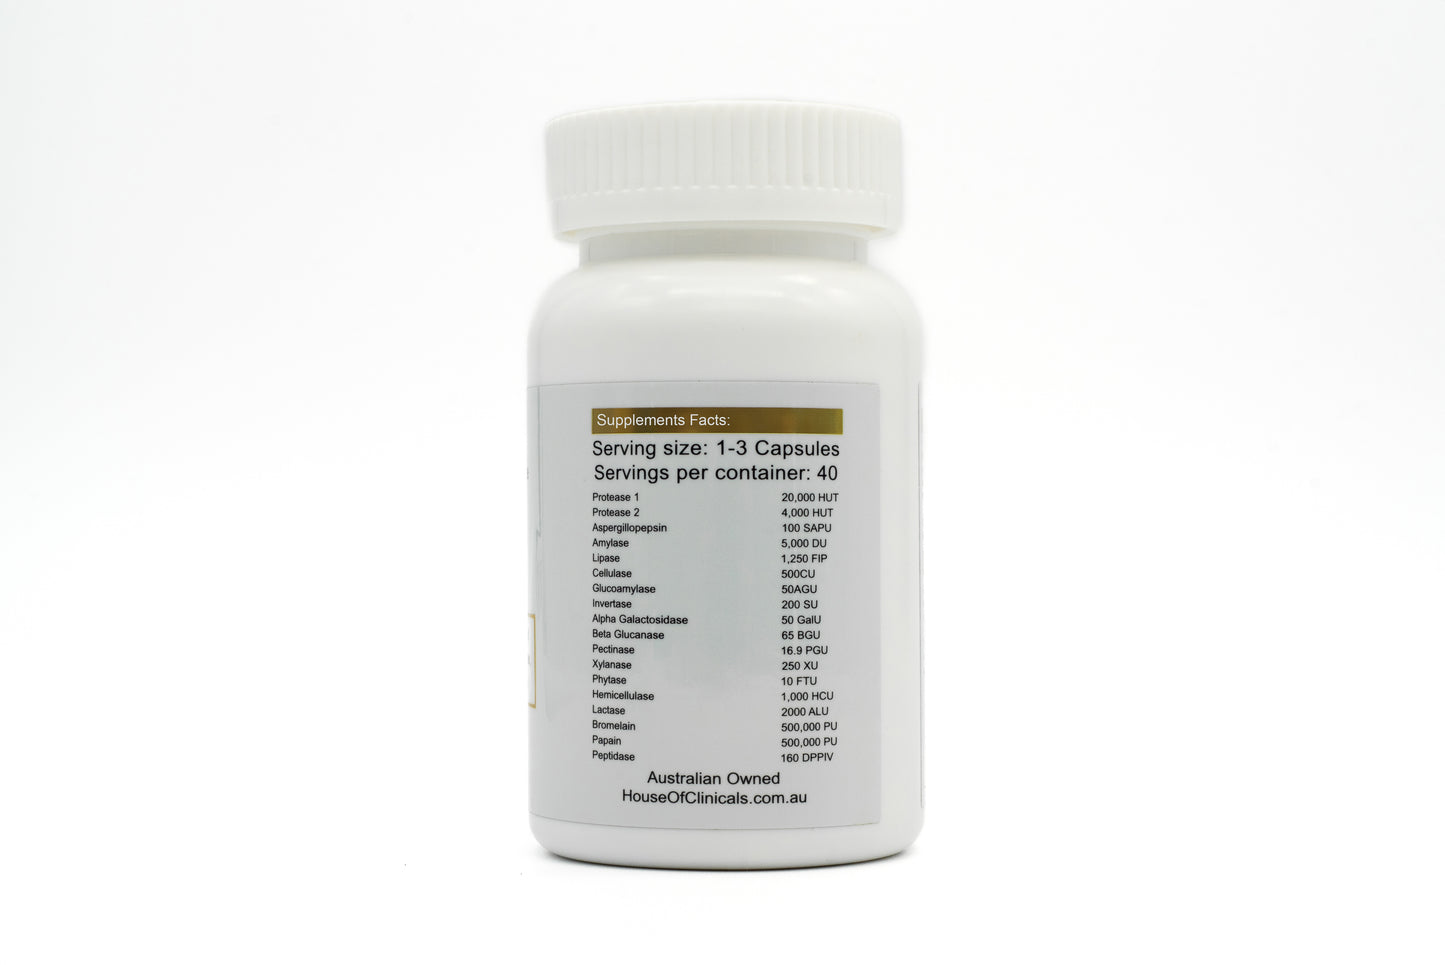 DIGESTIVE N-ZYMES - Extra Strength